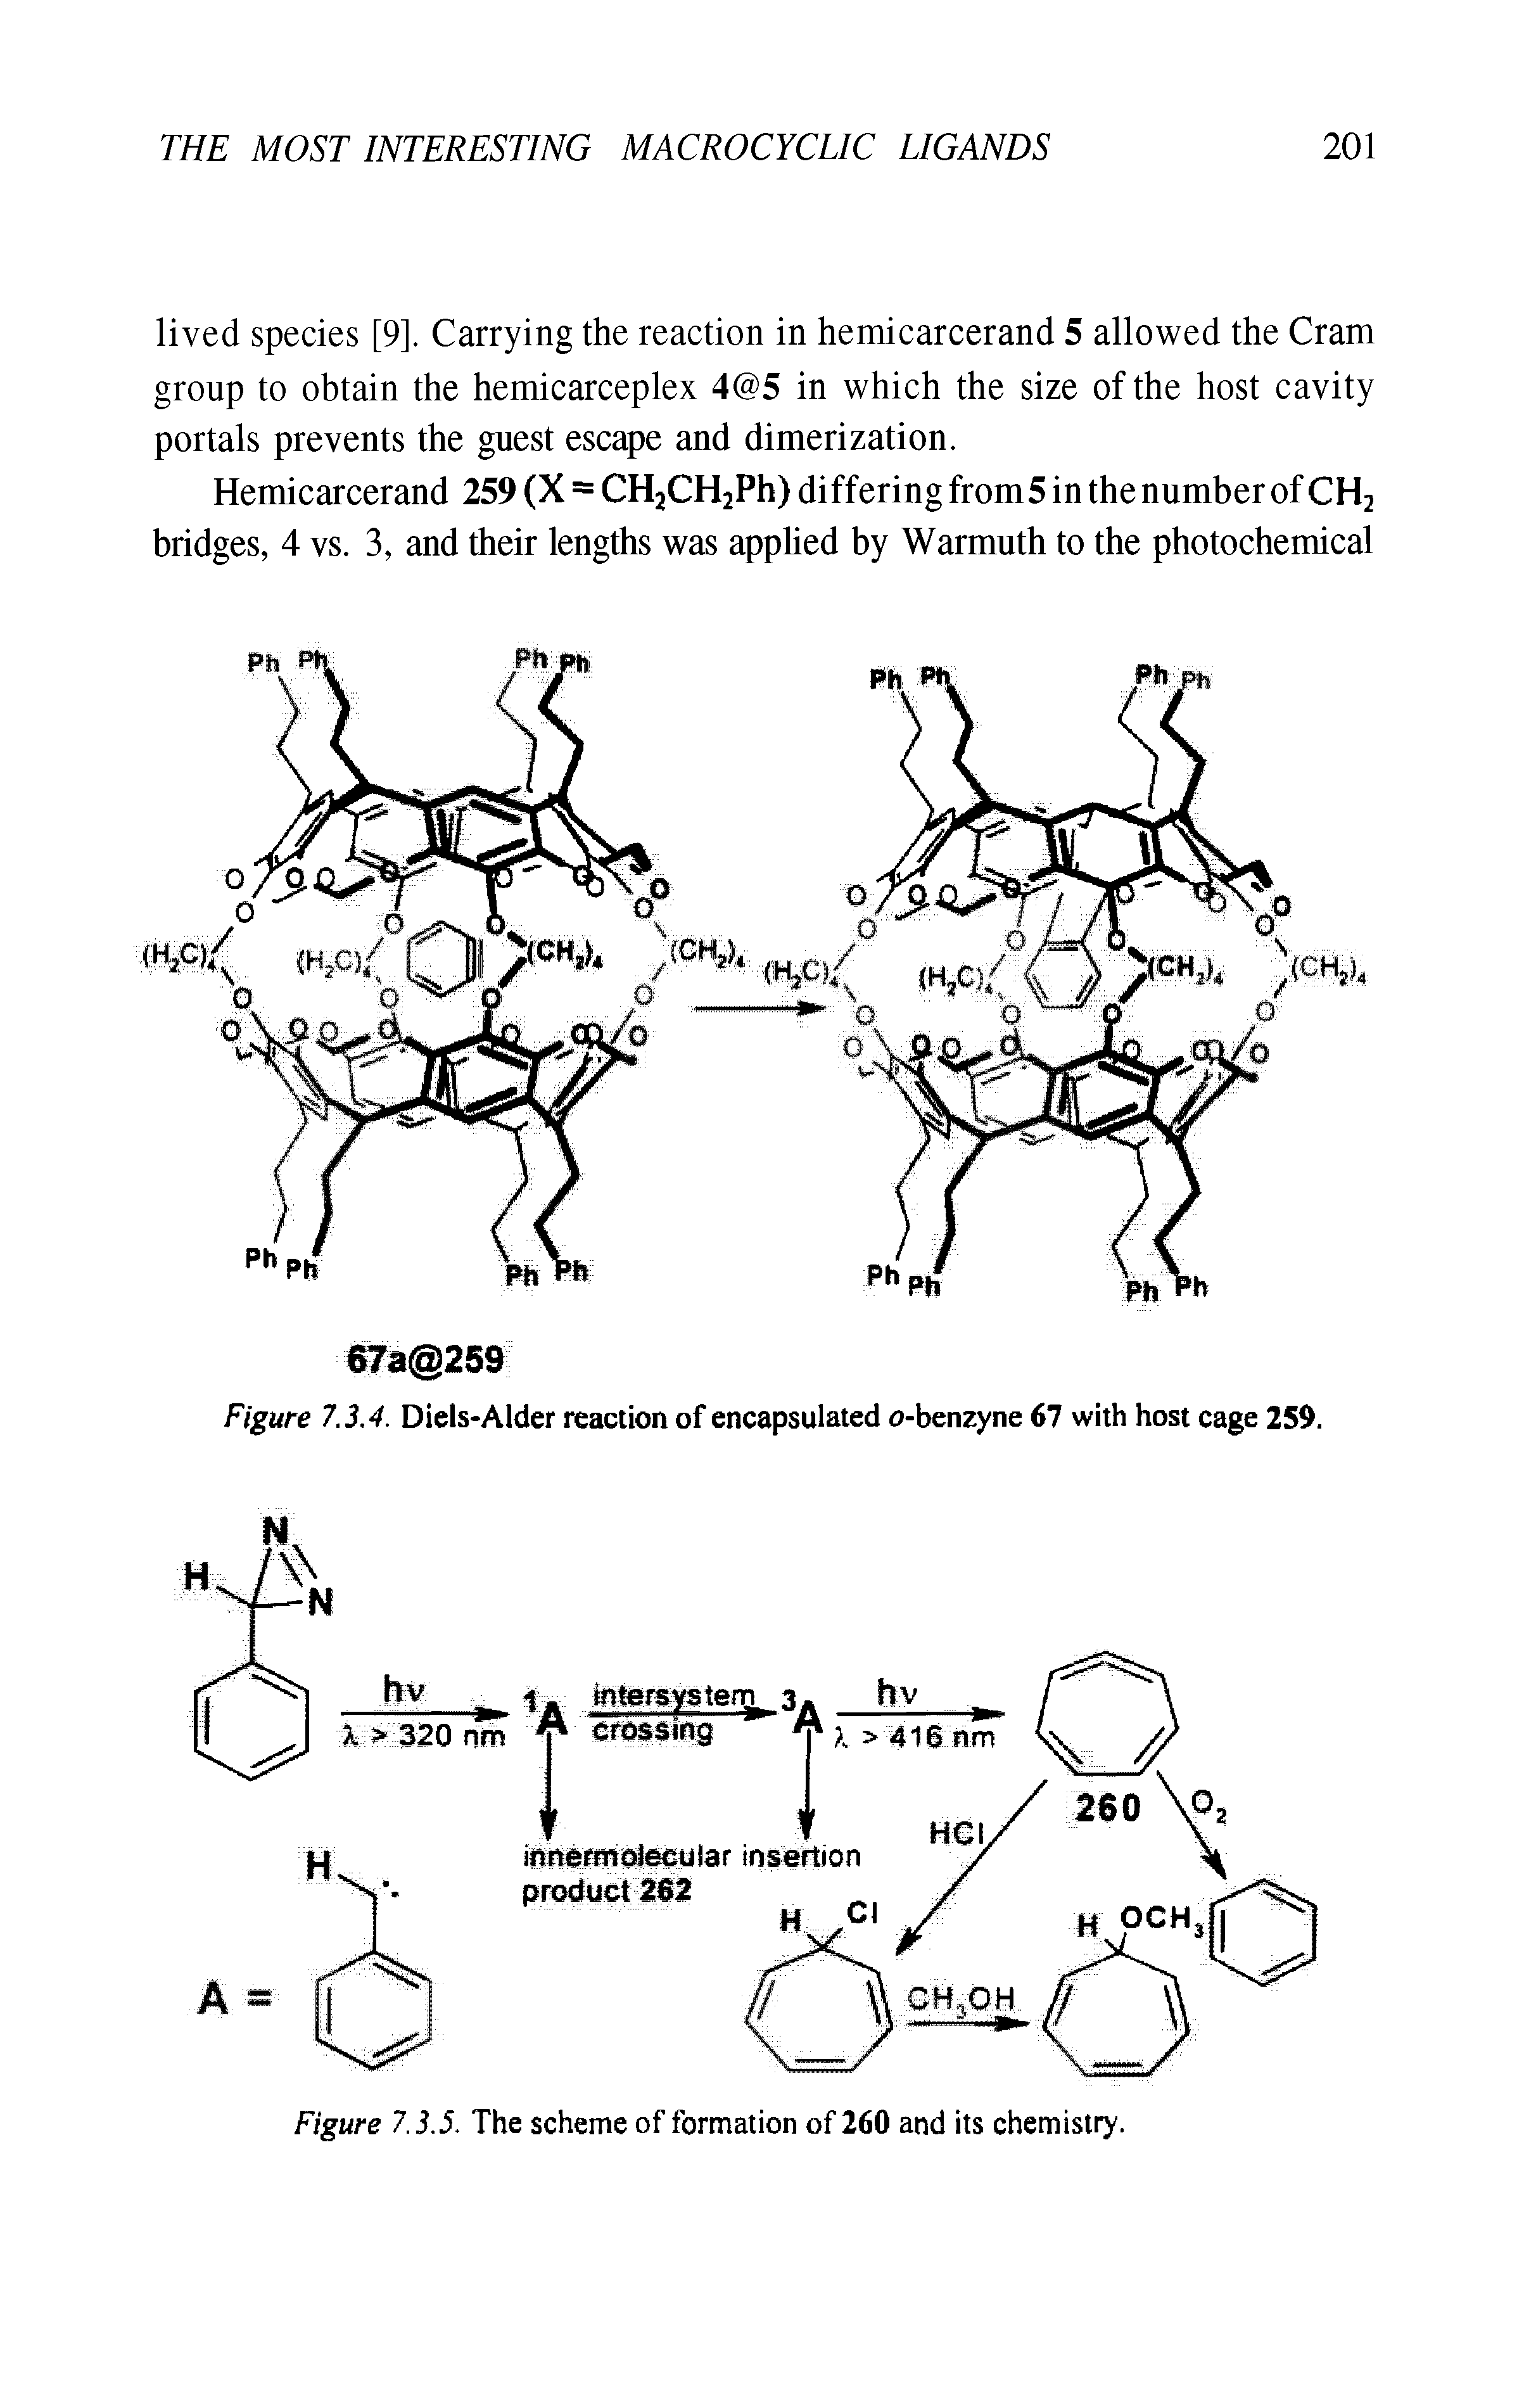 Figure 7.3.4. Diels-Alder reaction of encapsulated o-benzyne 67 with host cage 259.